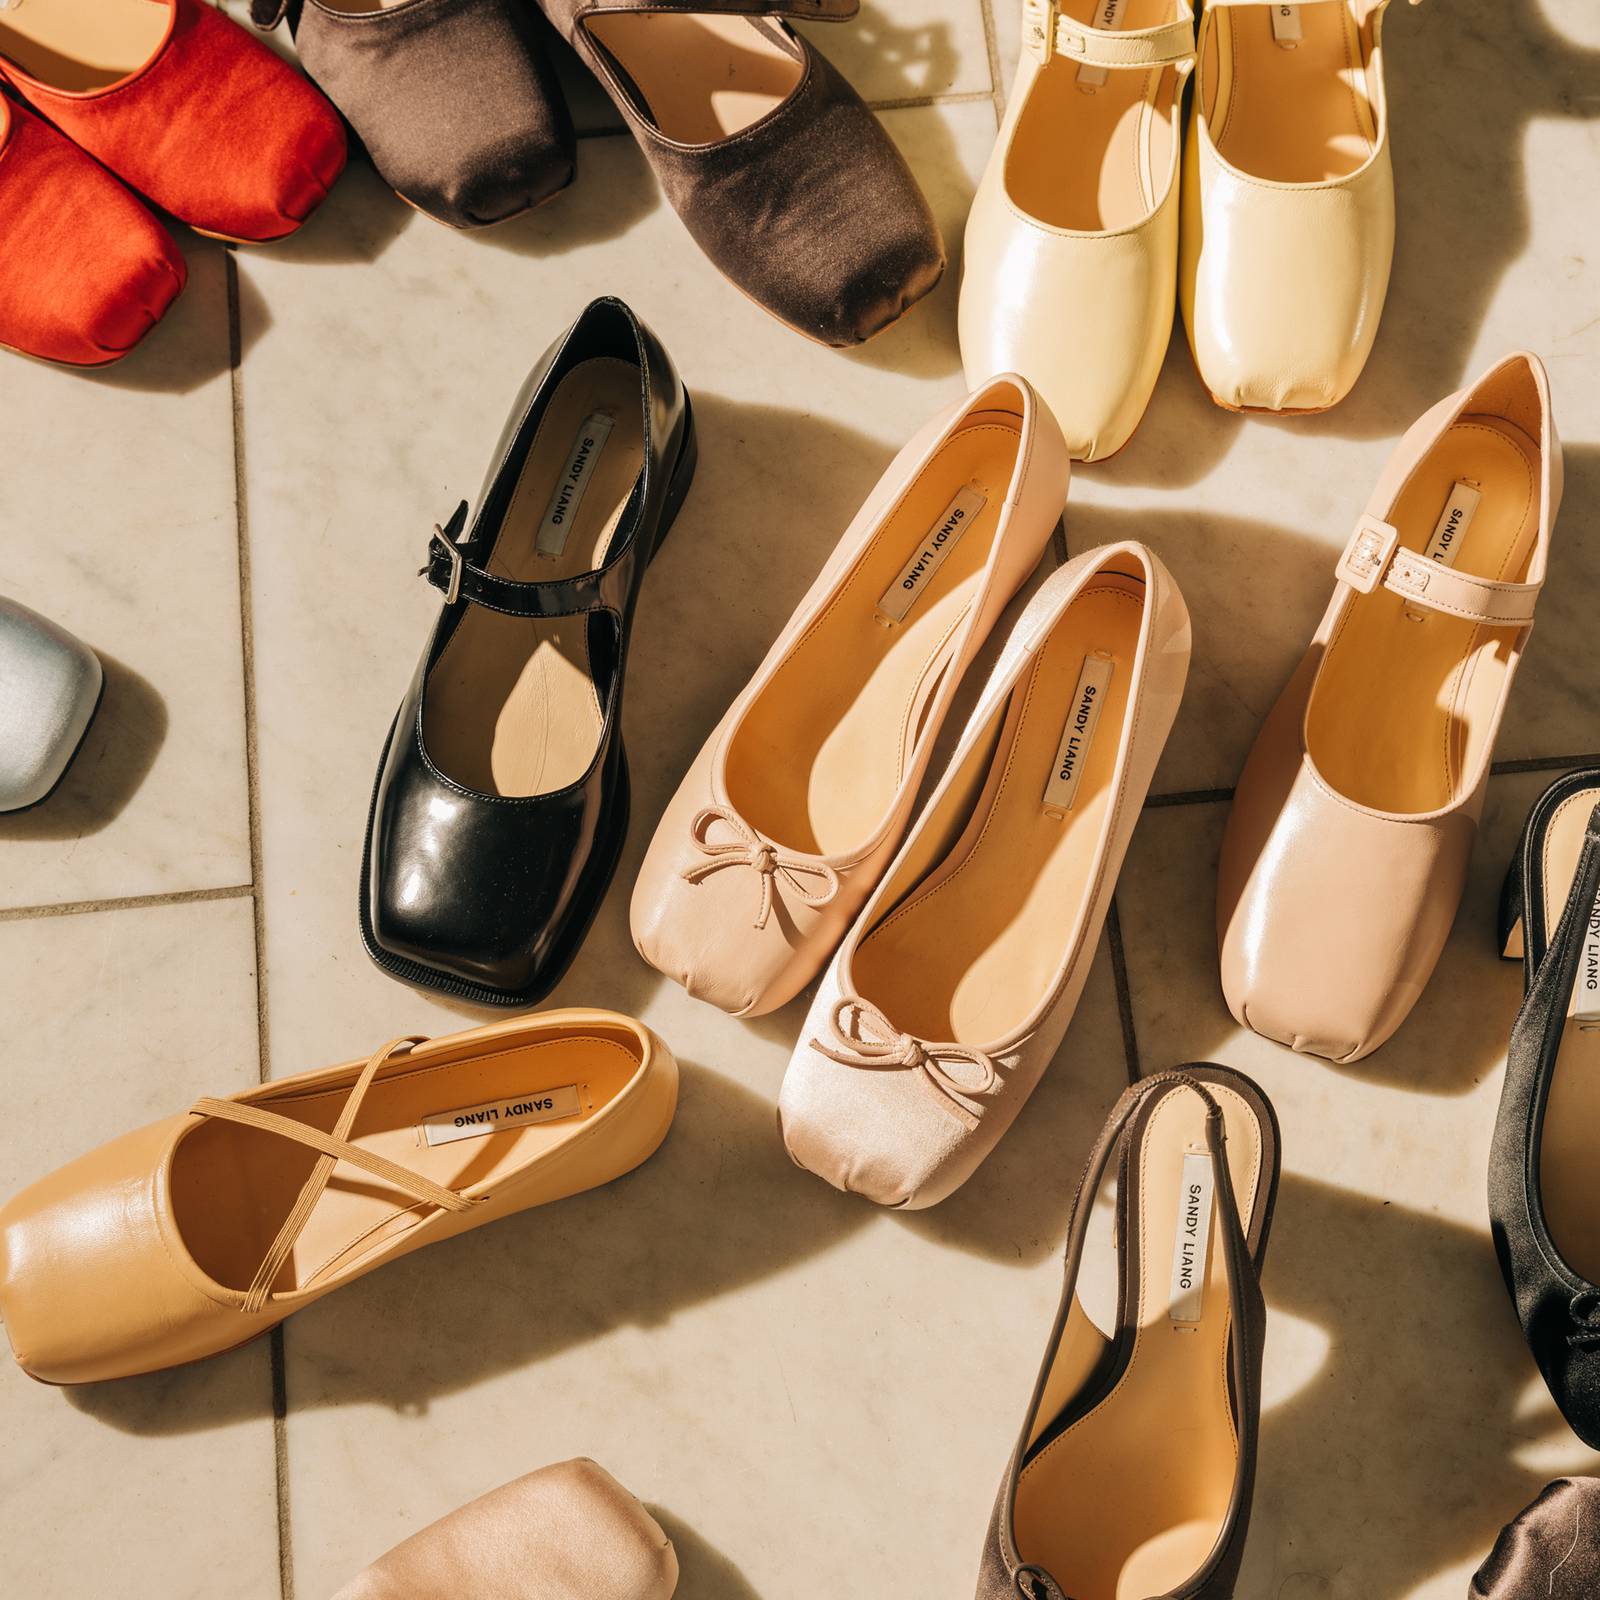 Ballet flats are back. Podiatrists everywhere are putting down